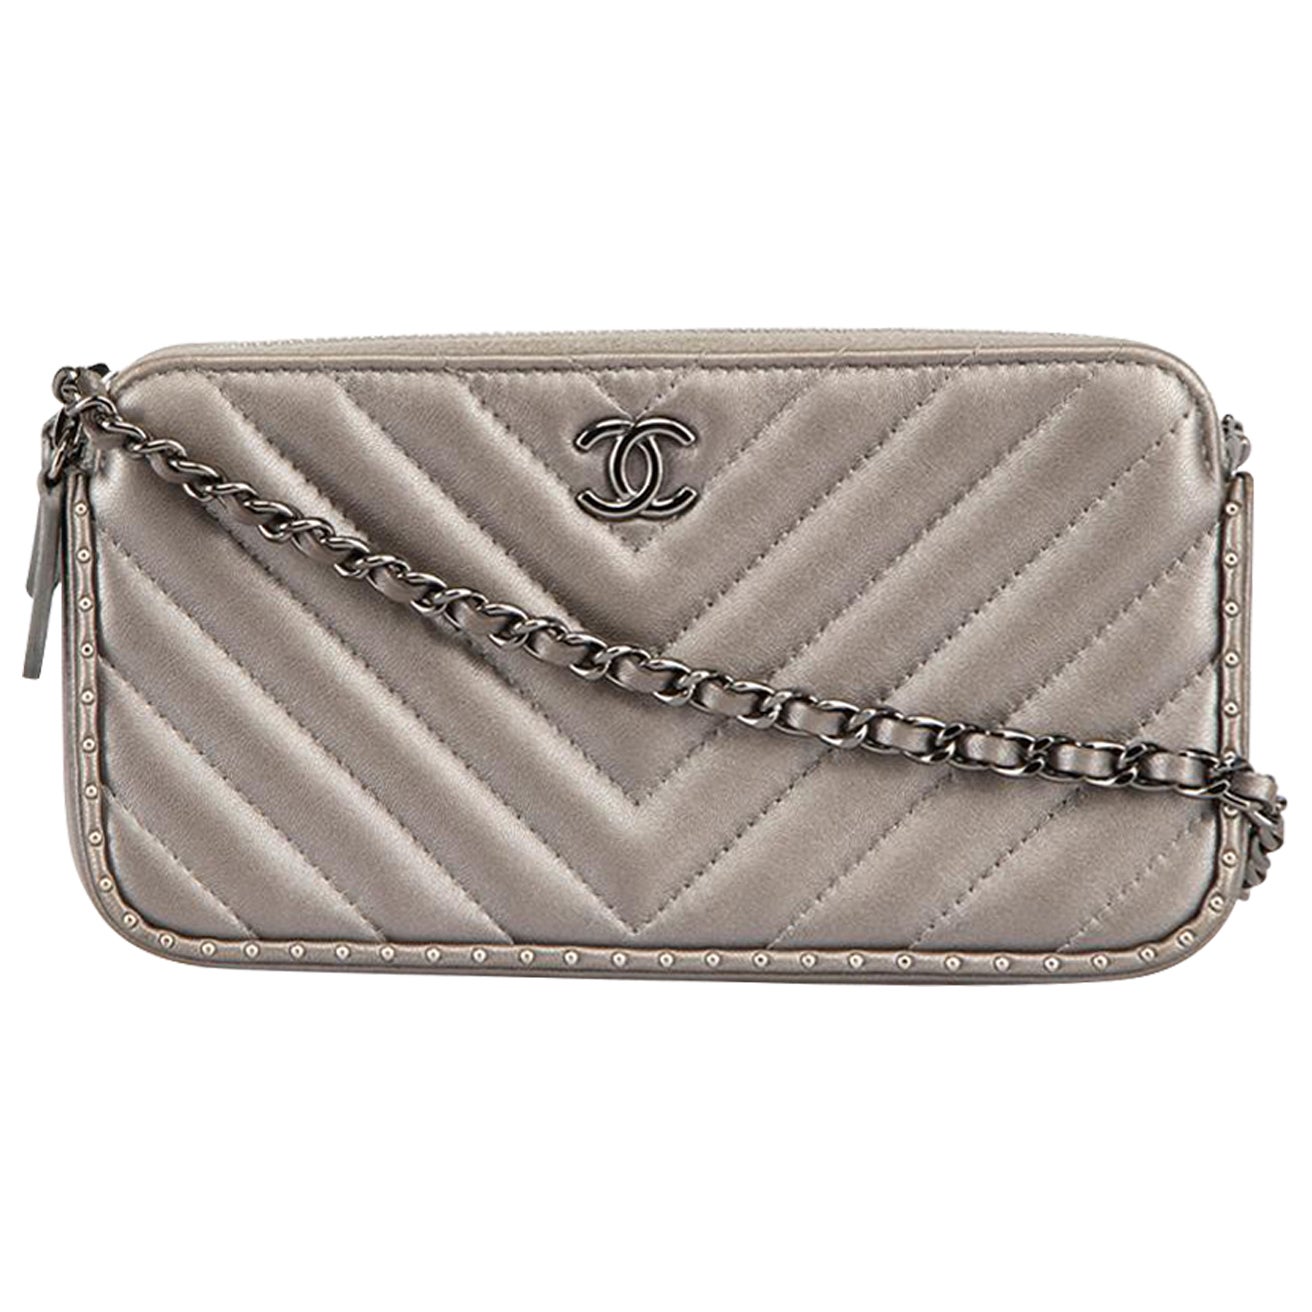 Chanel 2018 Gunmetal Leather Wallet on Chain